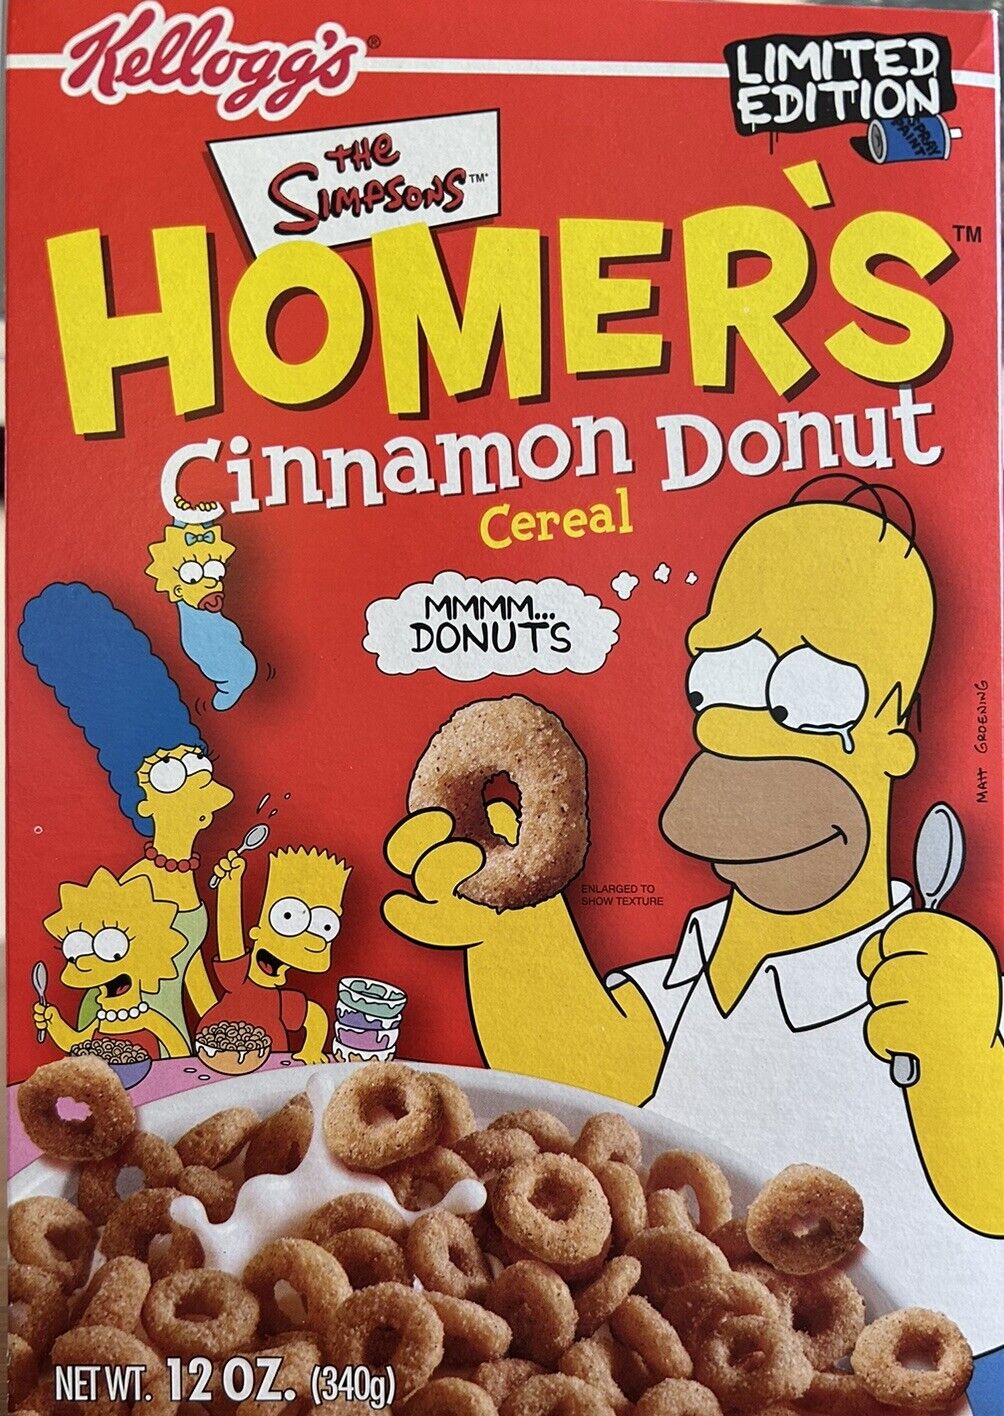 The Simpsons Homer's Cinnamon Donut Kellogg's Limited Edition Cereal Box 2001